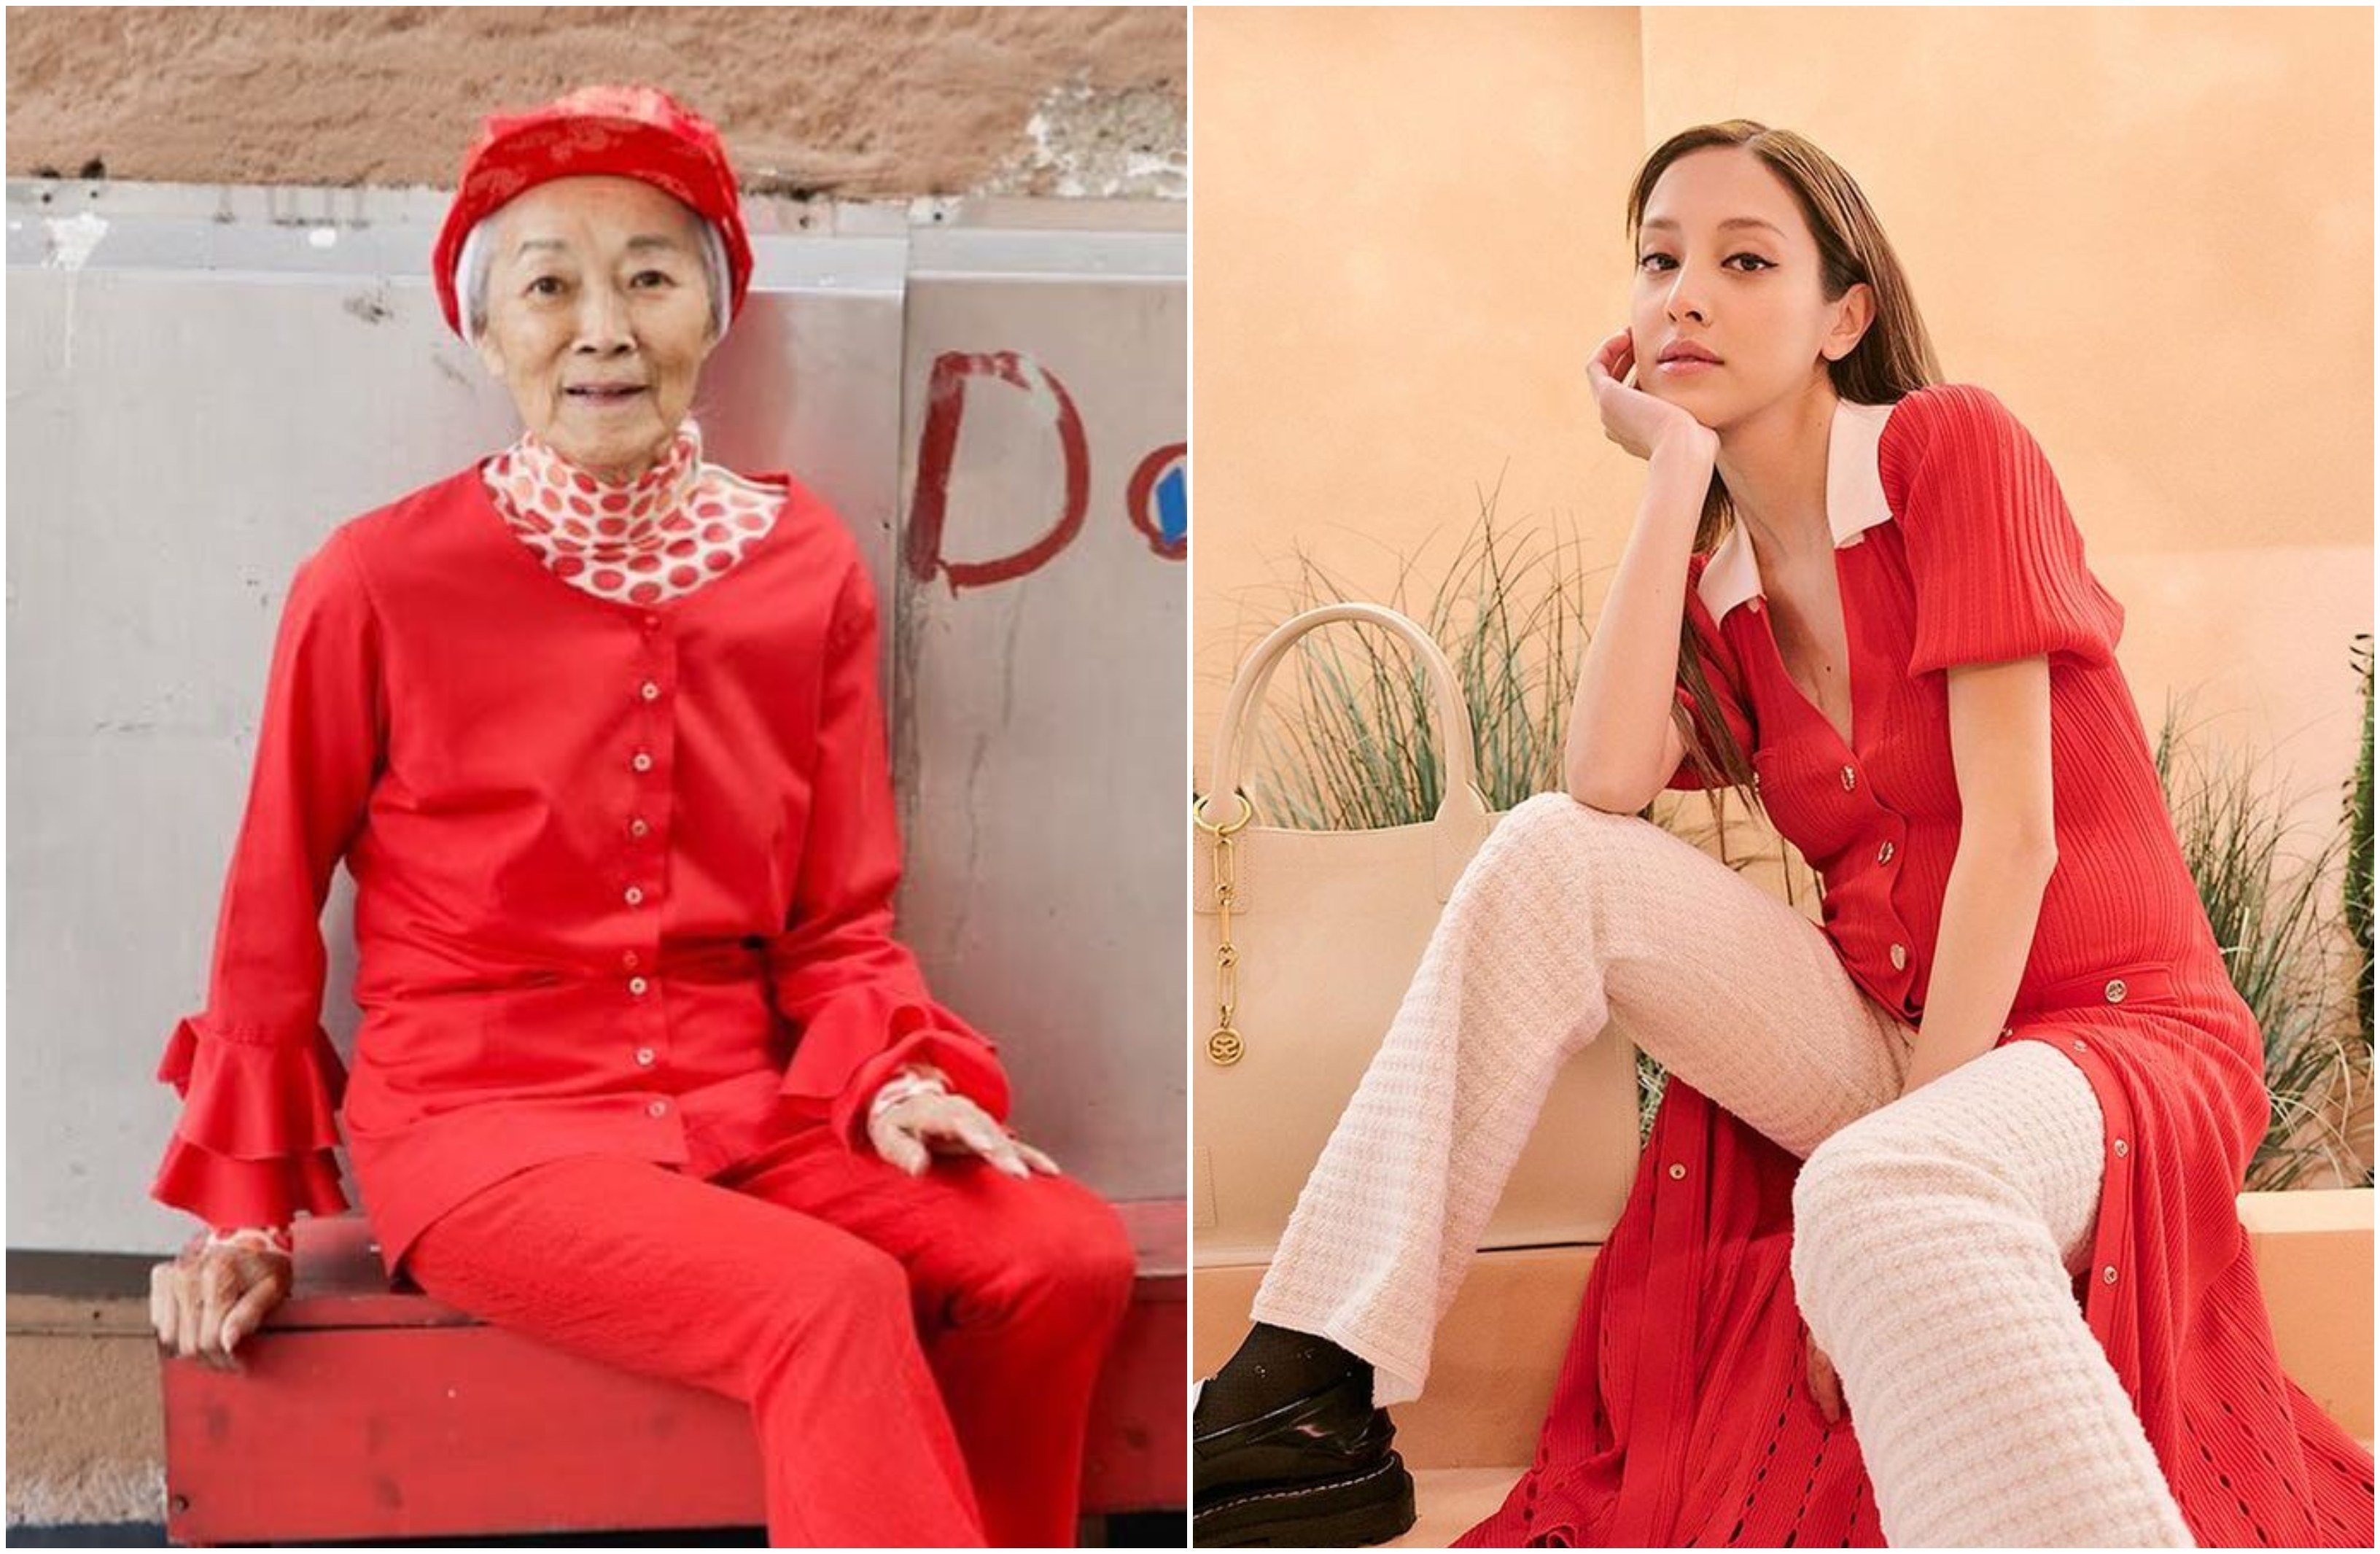 Dorothy “Polkadot” Quock and Grace Chan both rocking the grandmacore fashion trend. Photos:  @chinatownpretty/Instagram, @ghlchan/Instagram